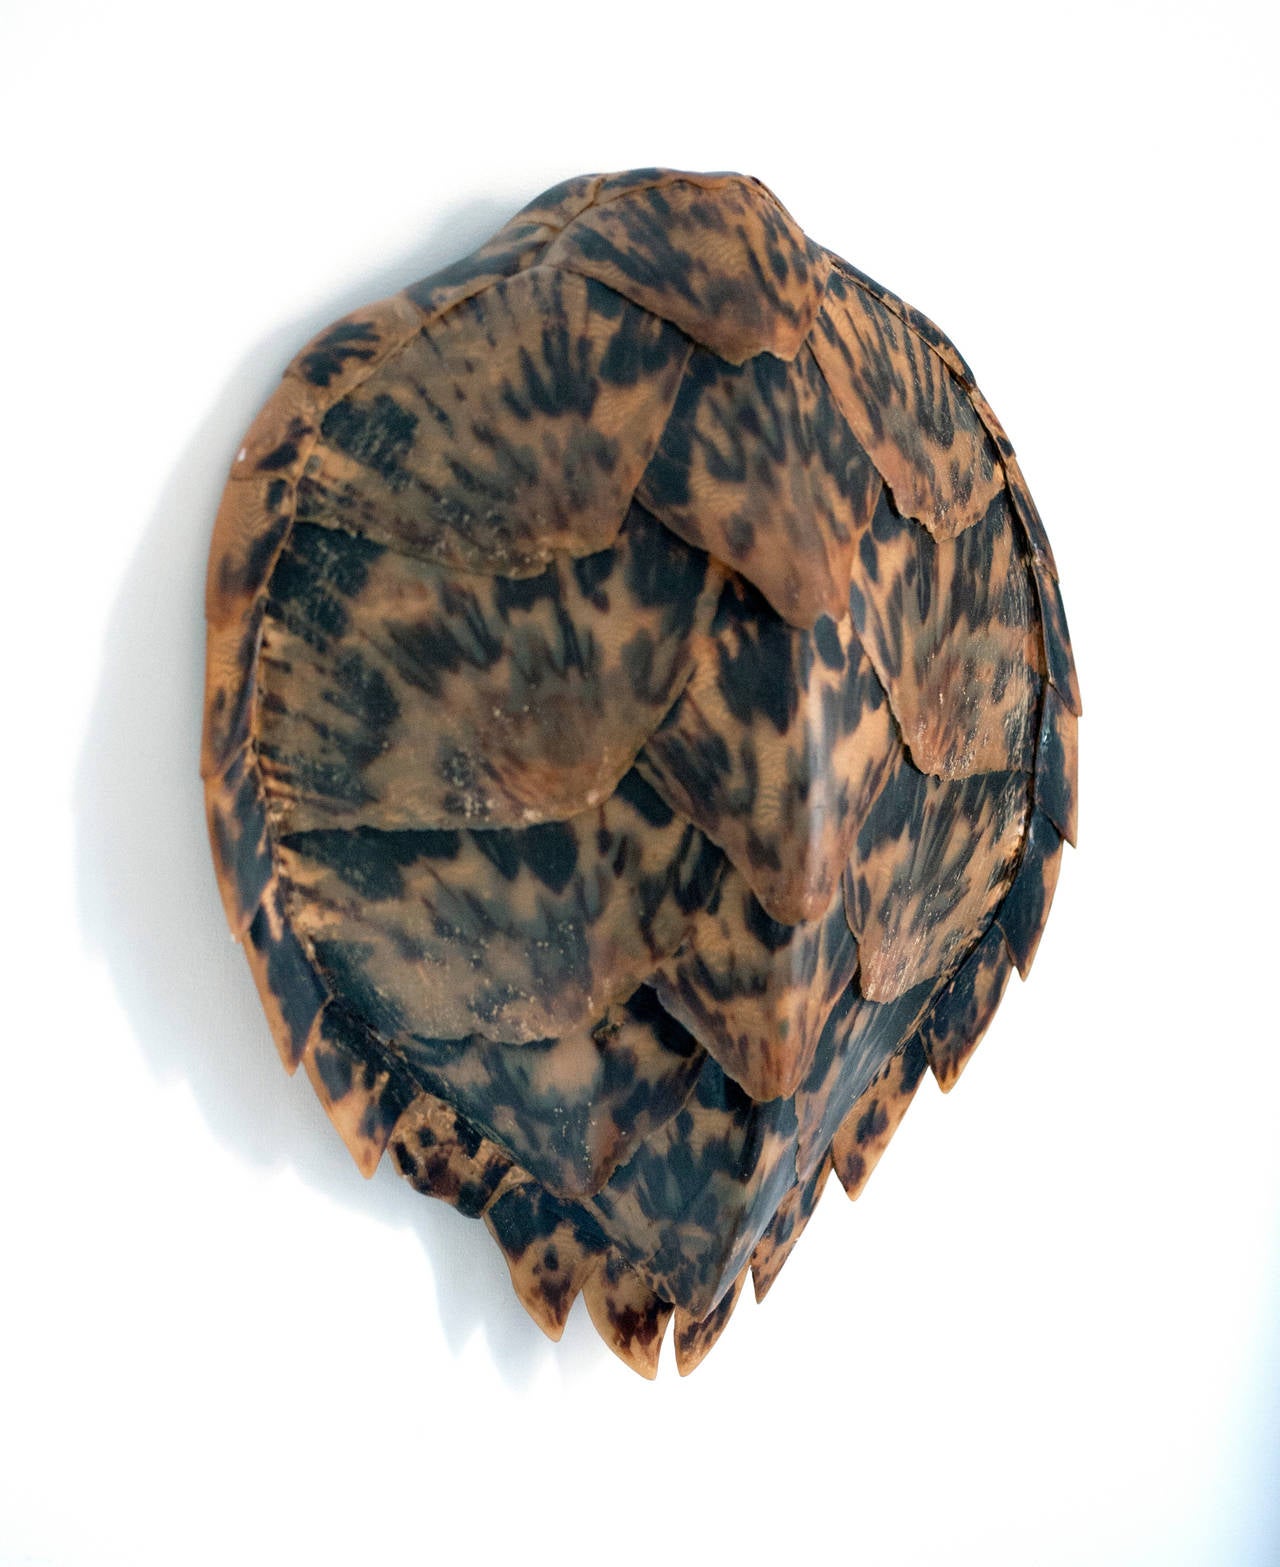 Attractive Hawkbill turtle shell from the 1950s.